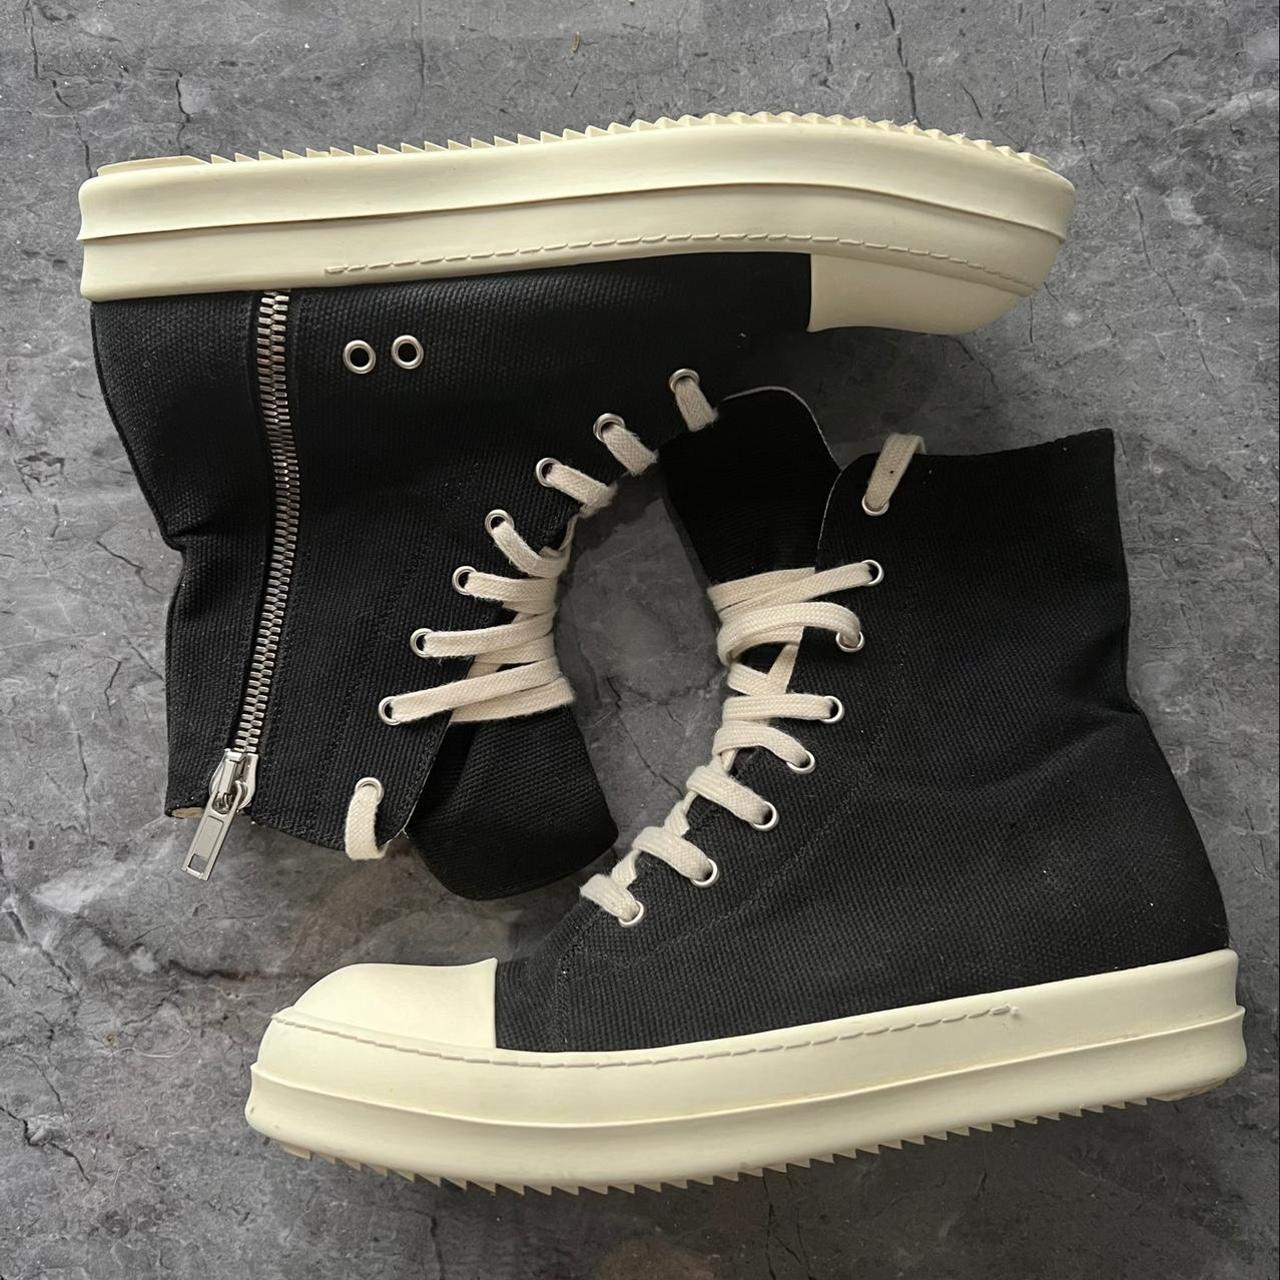 Rick Owens Trainers UK Size 7- EU 41 Available to... - Depop